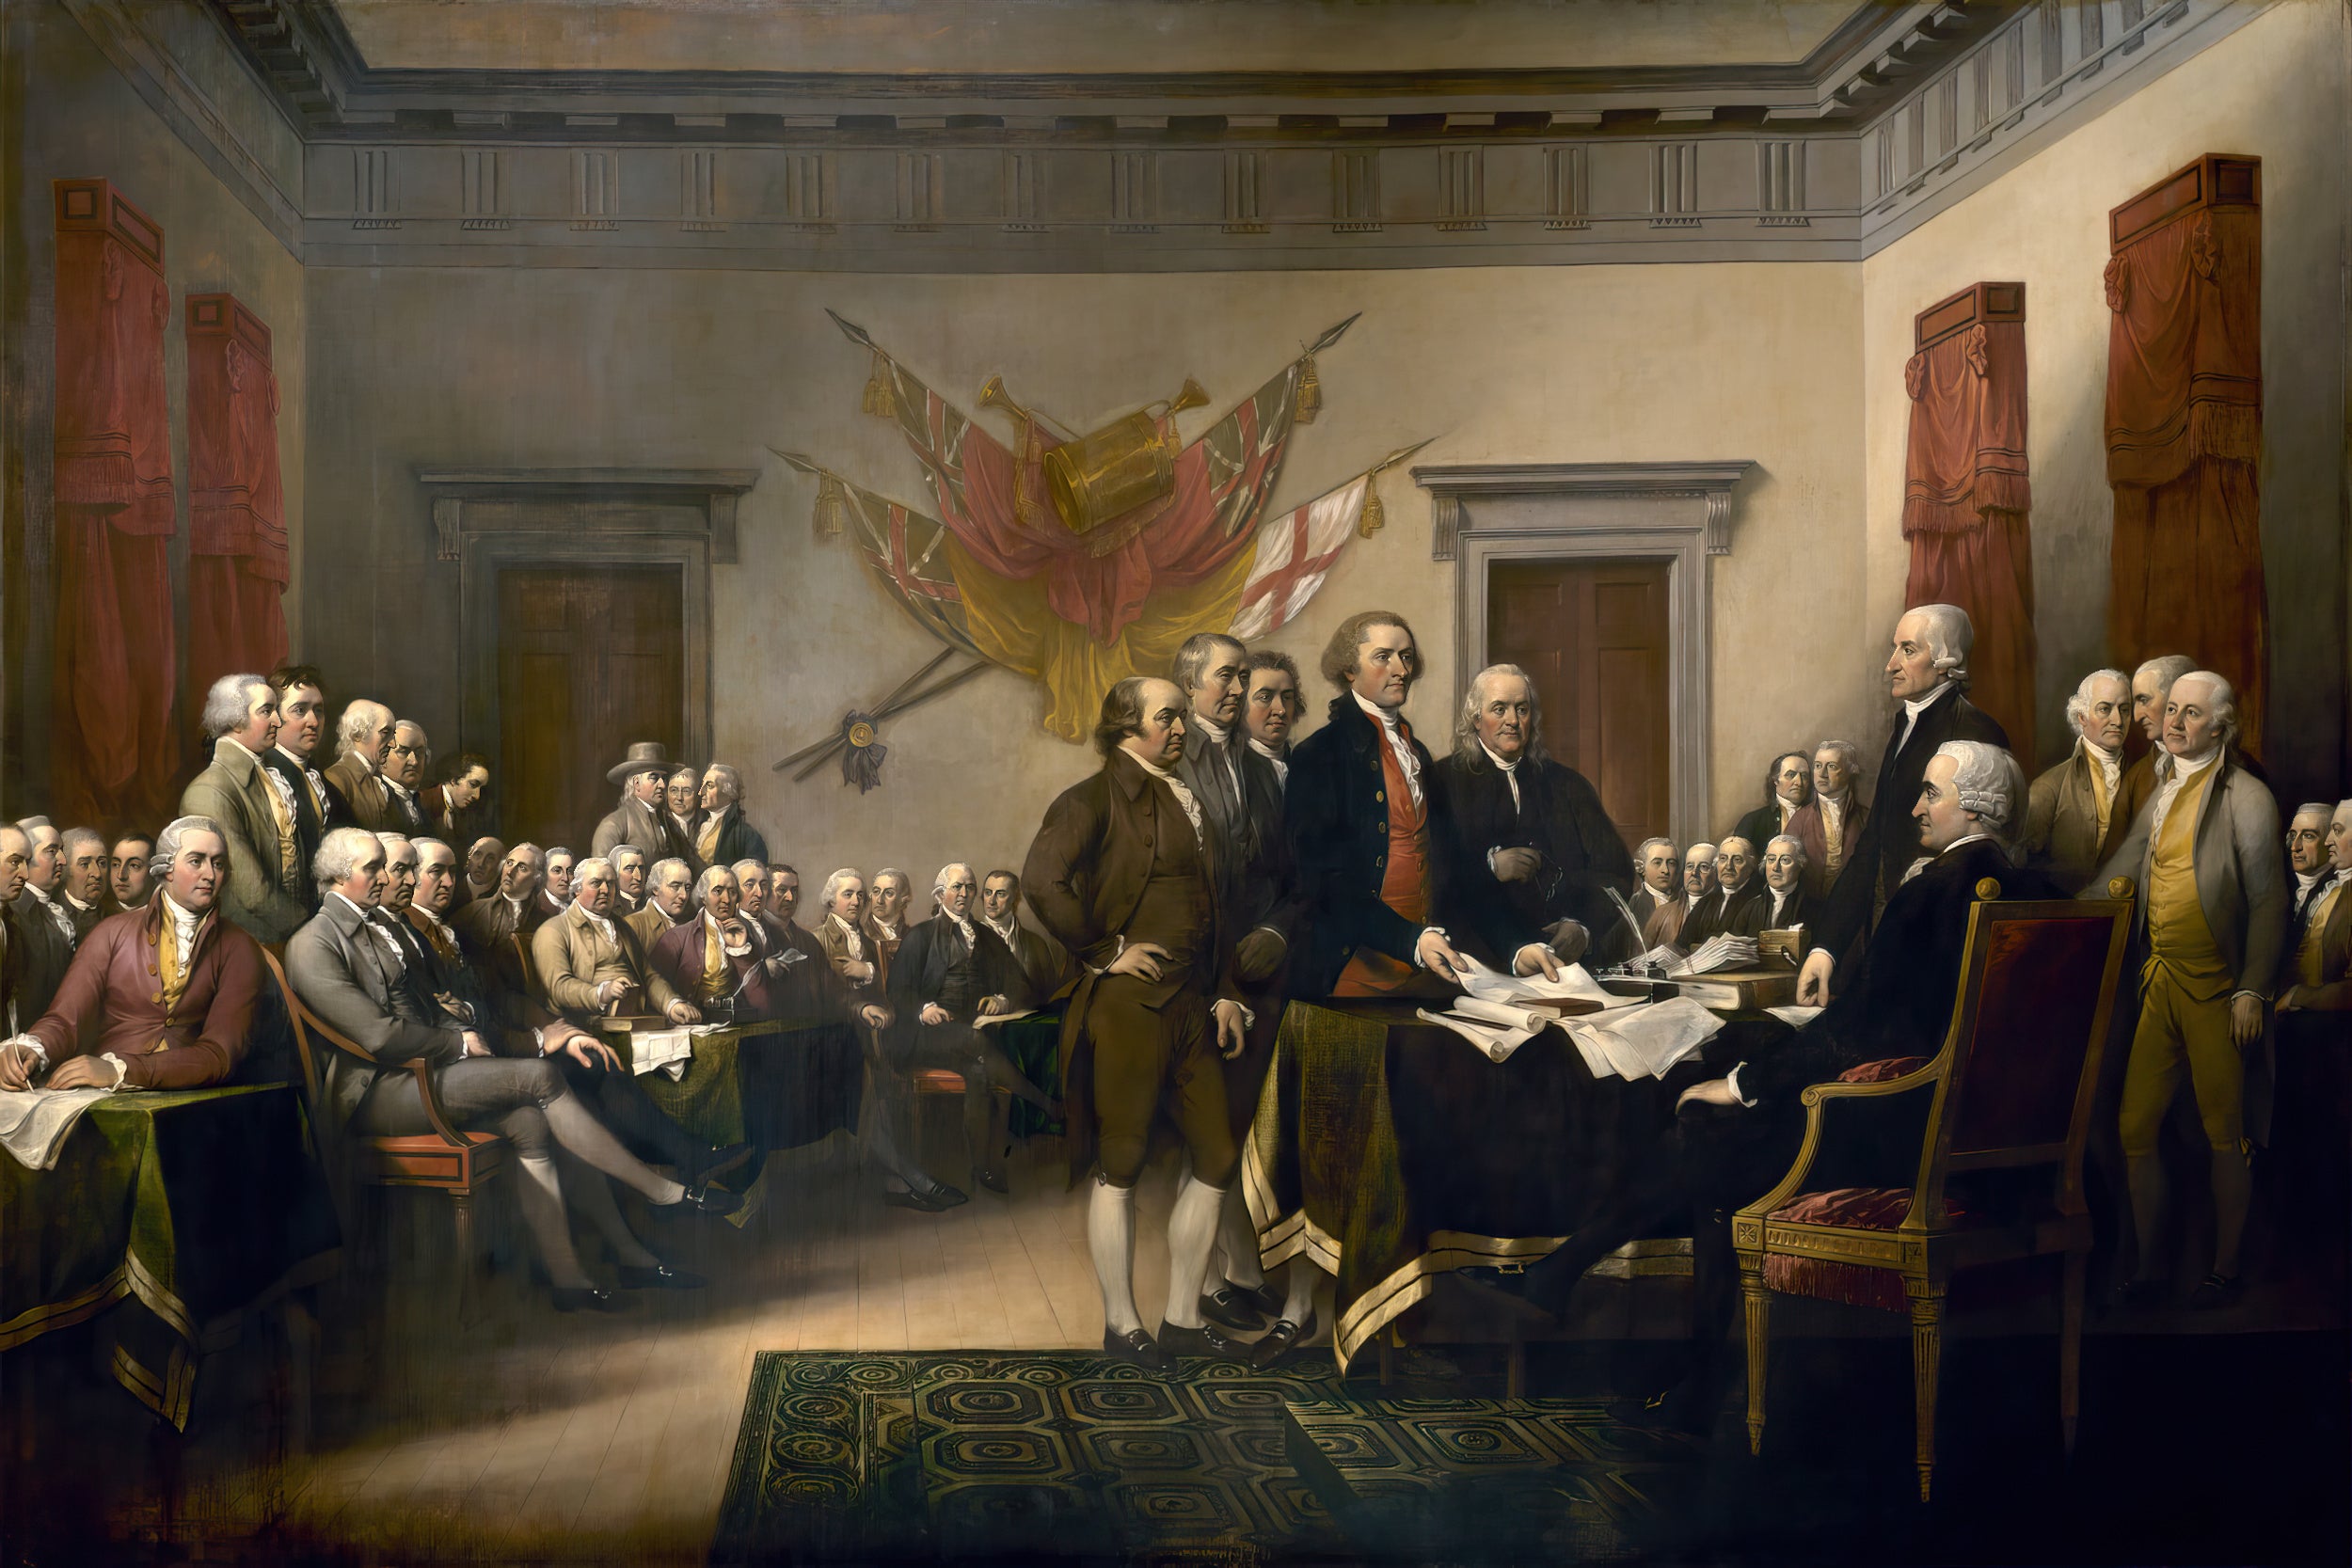 Declaration of Independence (Painting)